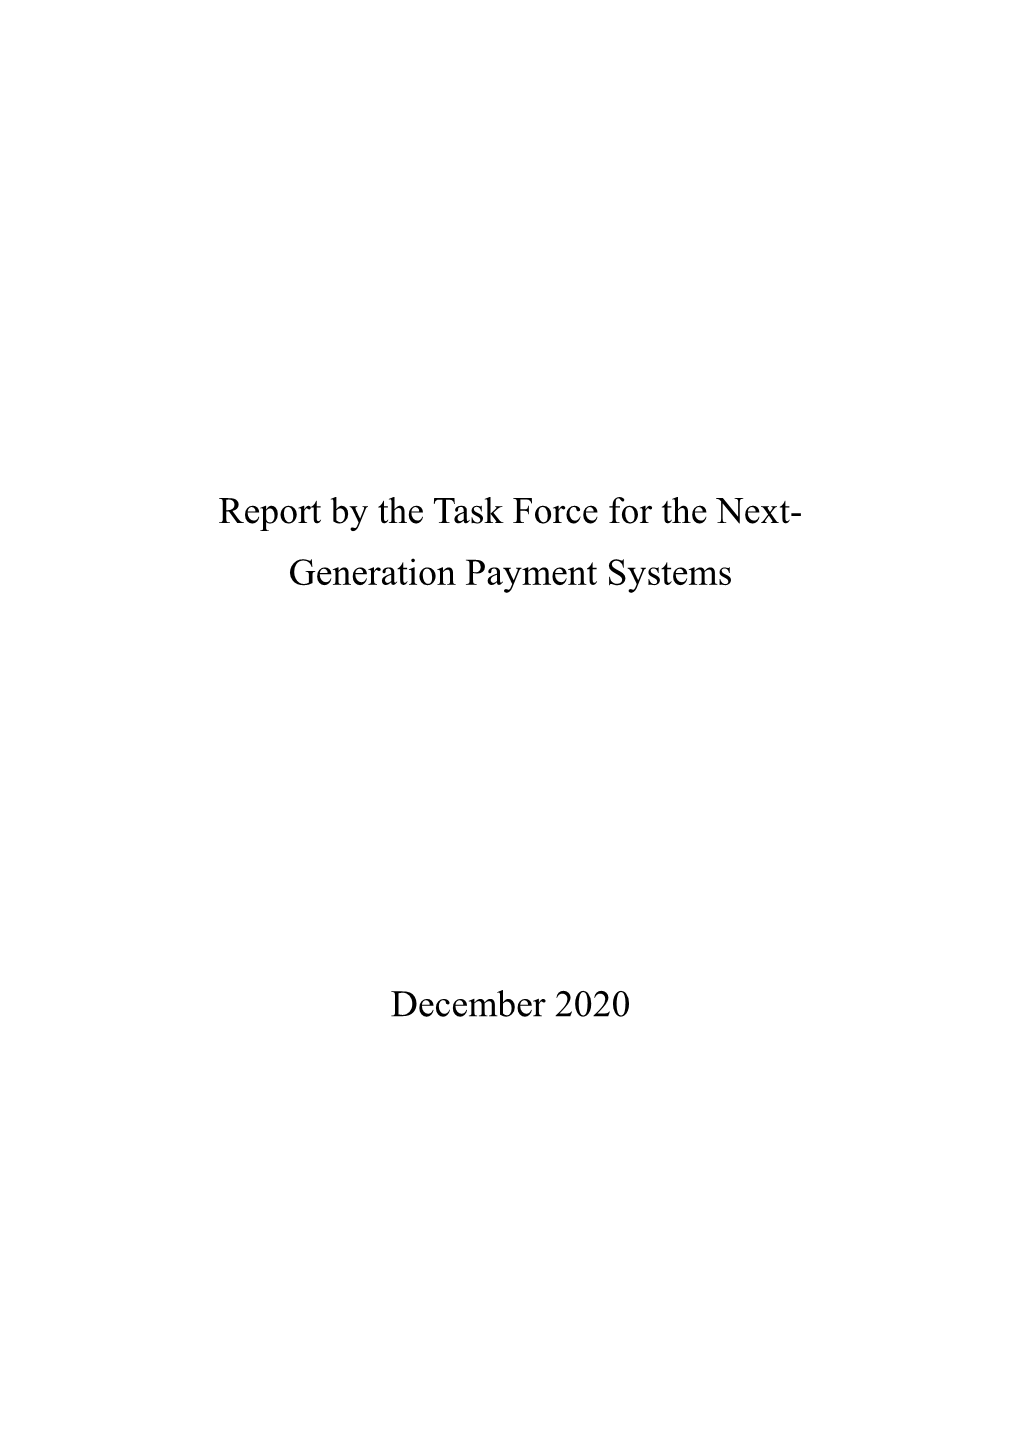 Report by the Task Force for the Next- Generation Payment Systems